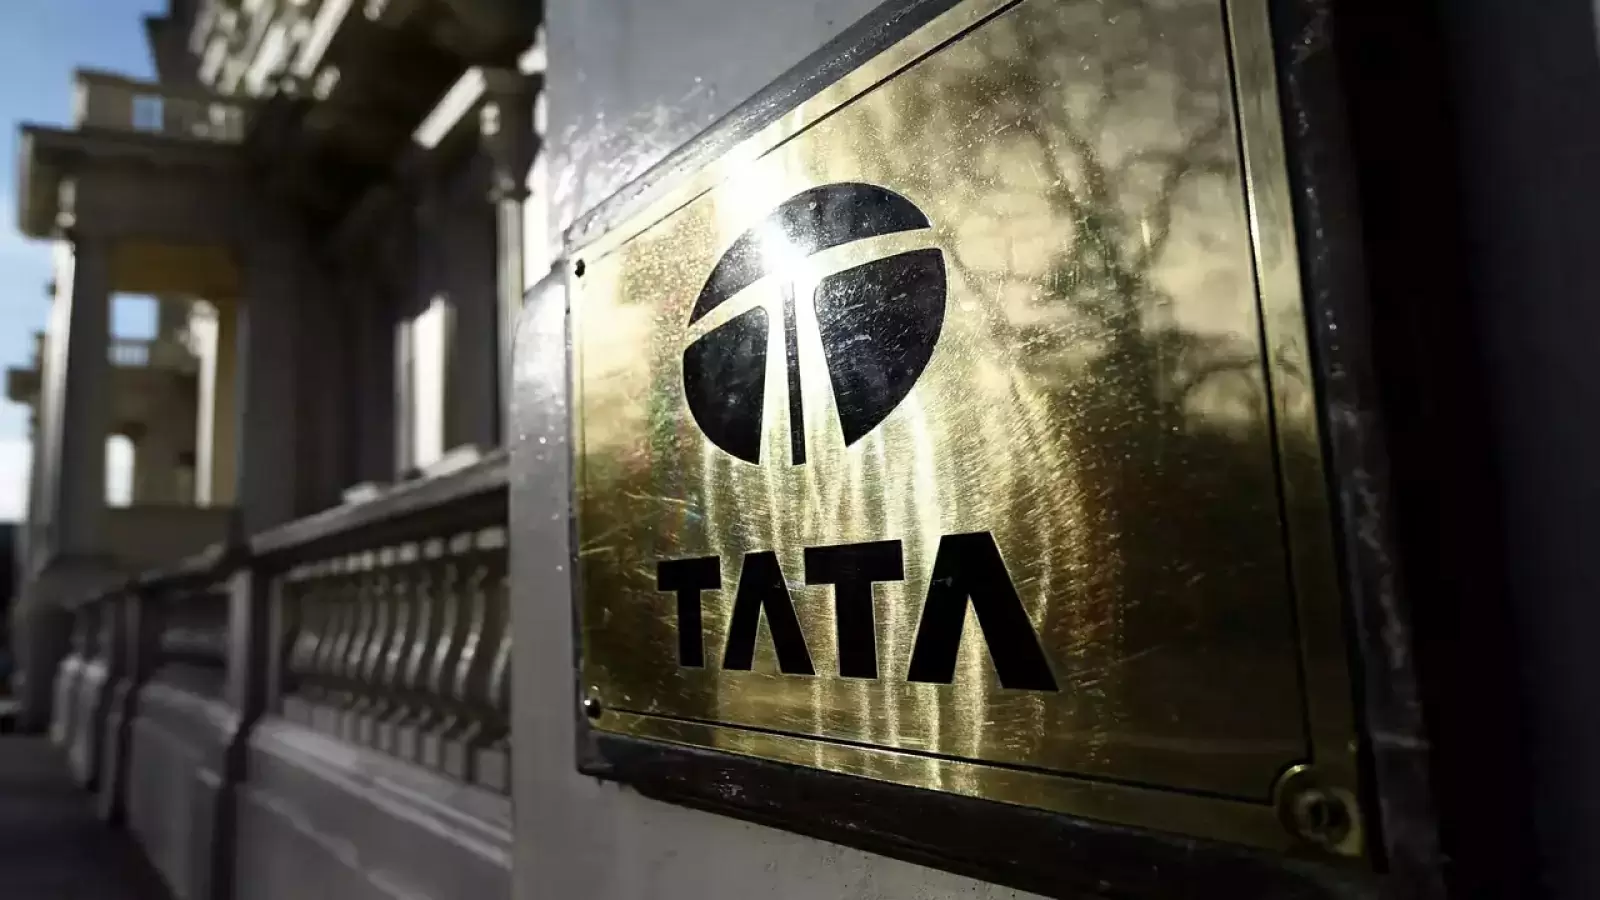 For Rs 9,000 crores, Tata Motors plans to build a new plant in Tamil Nadu, know the details